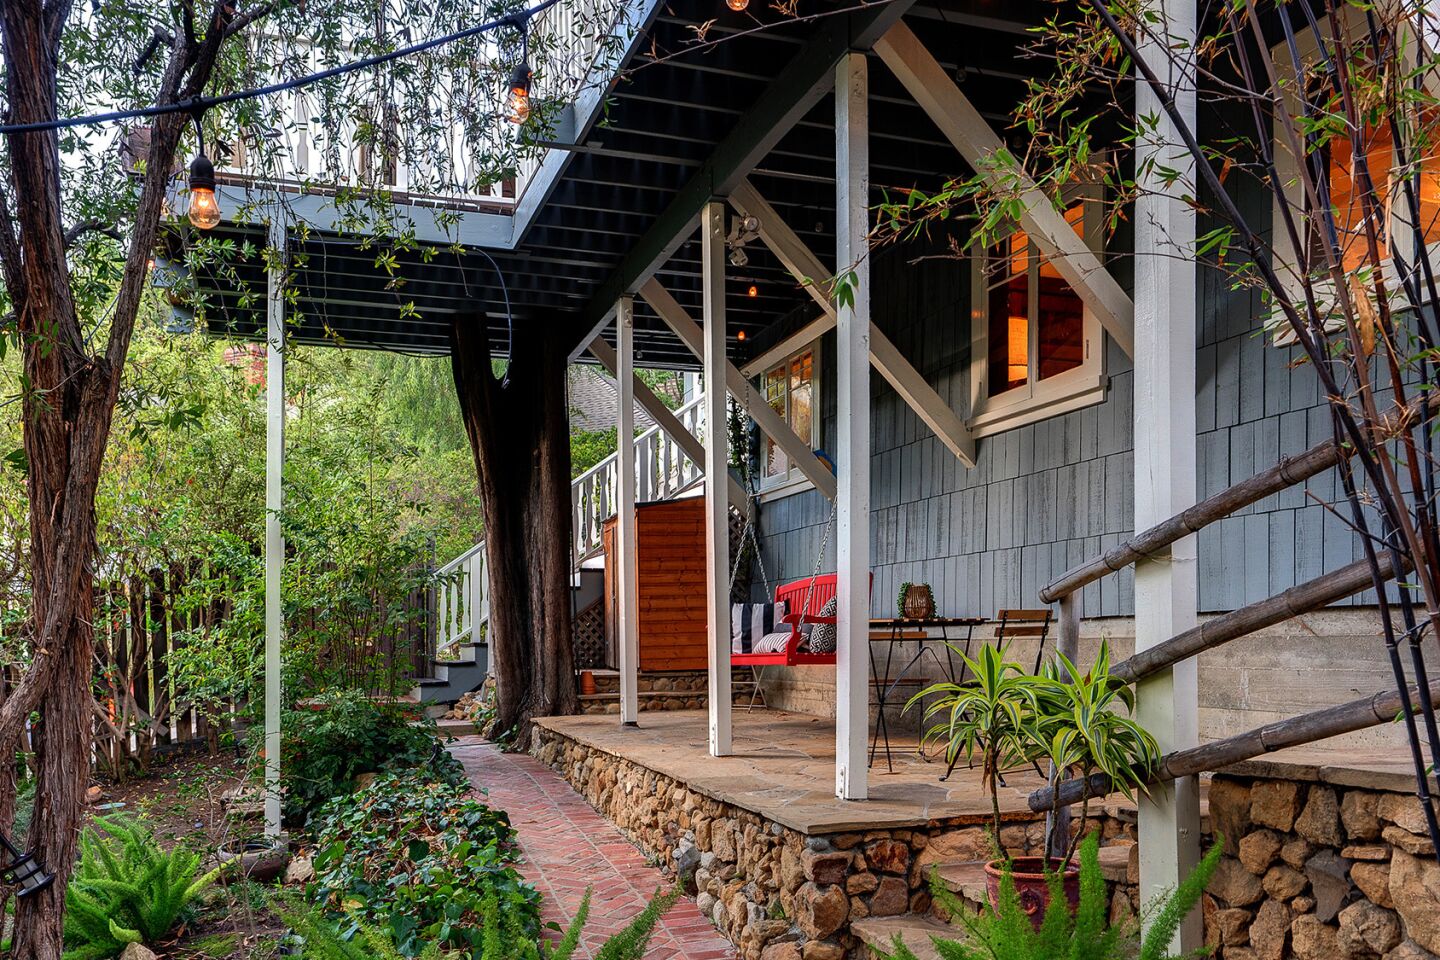 The shingle-clad Craftsman, built in 1912, is one of the original homes in the Hollywood Hills.